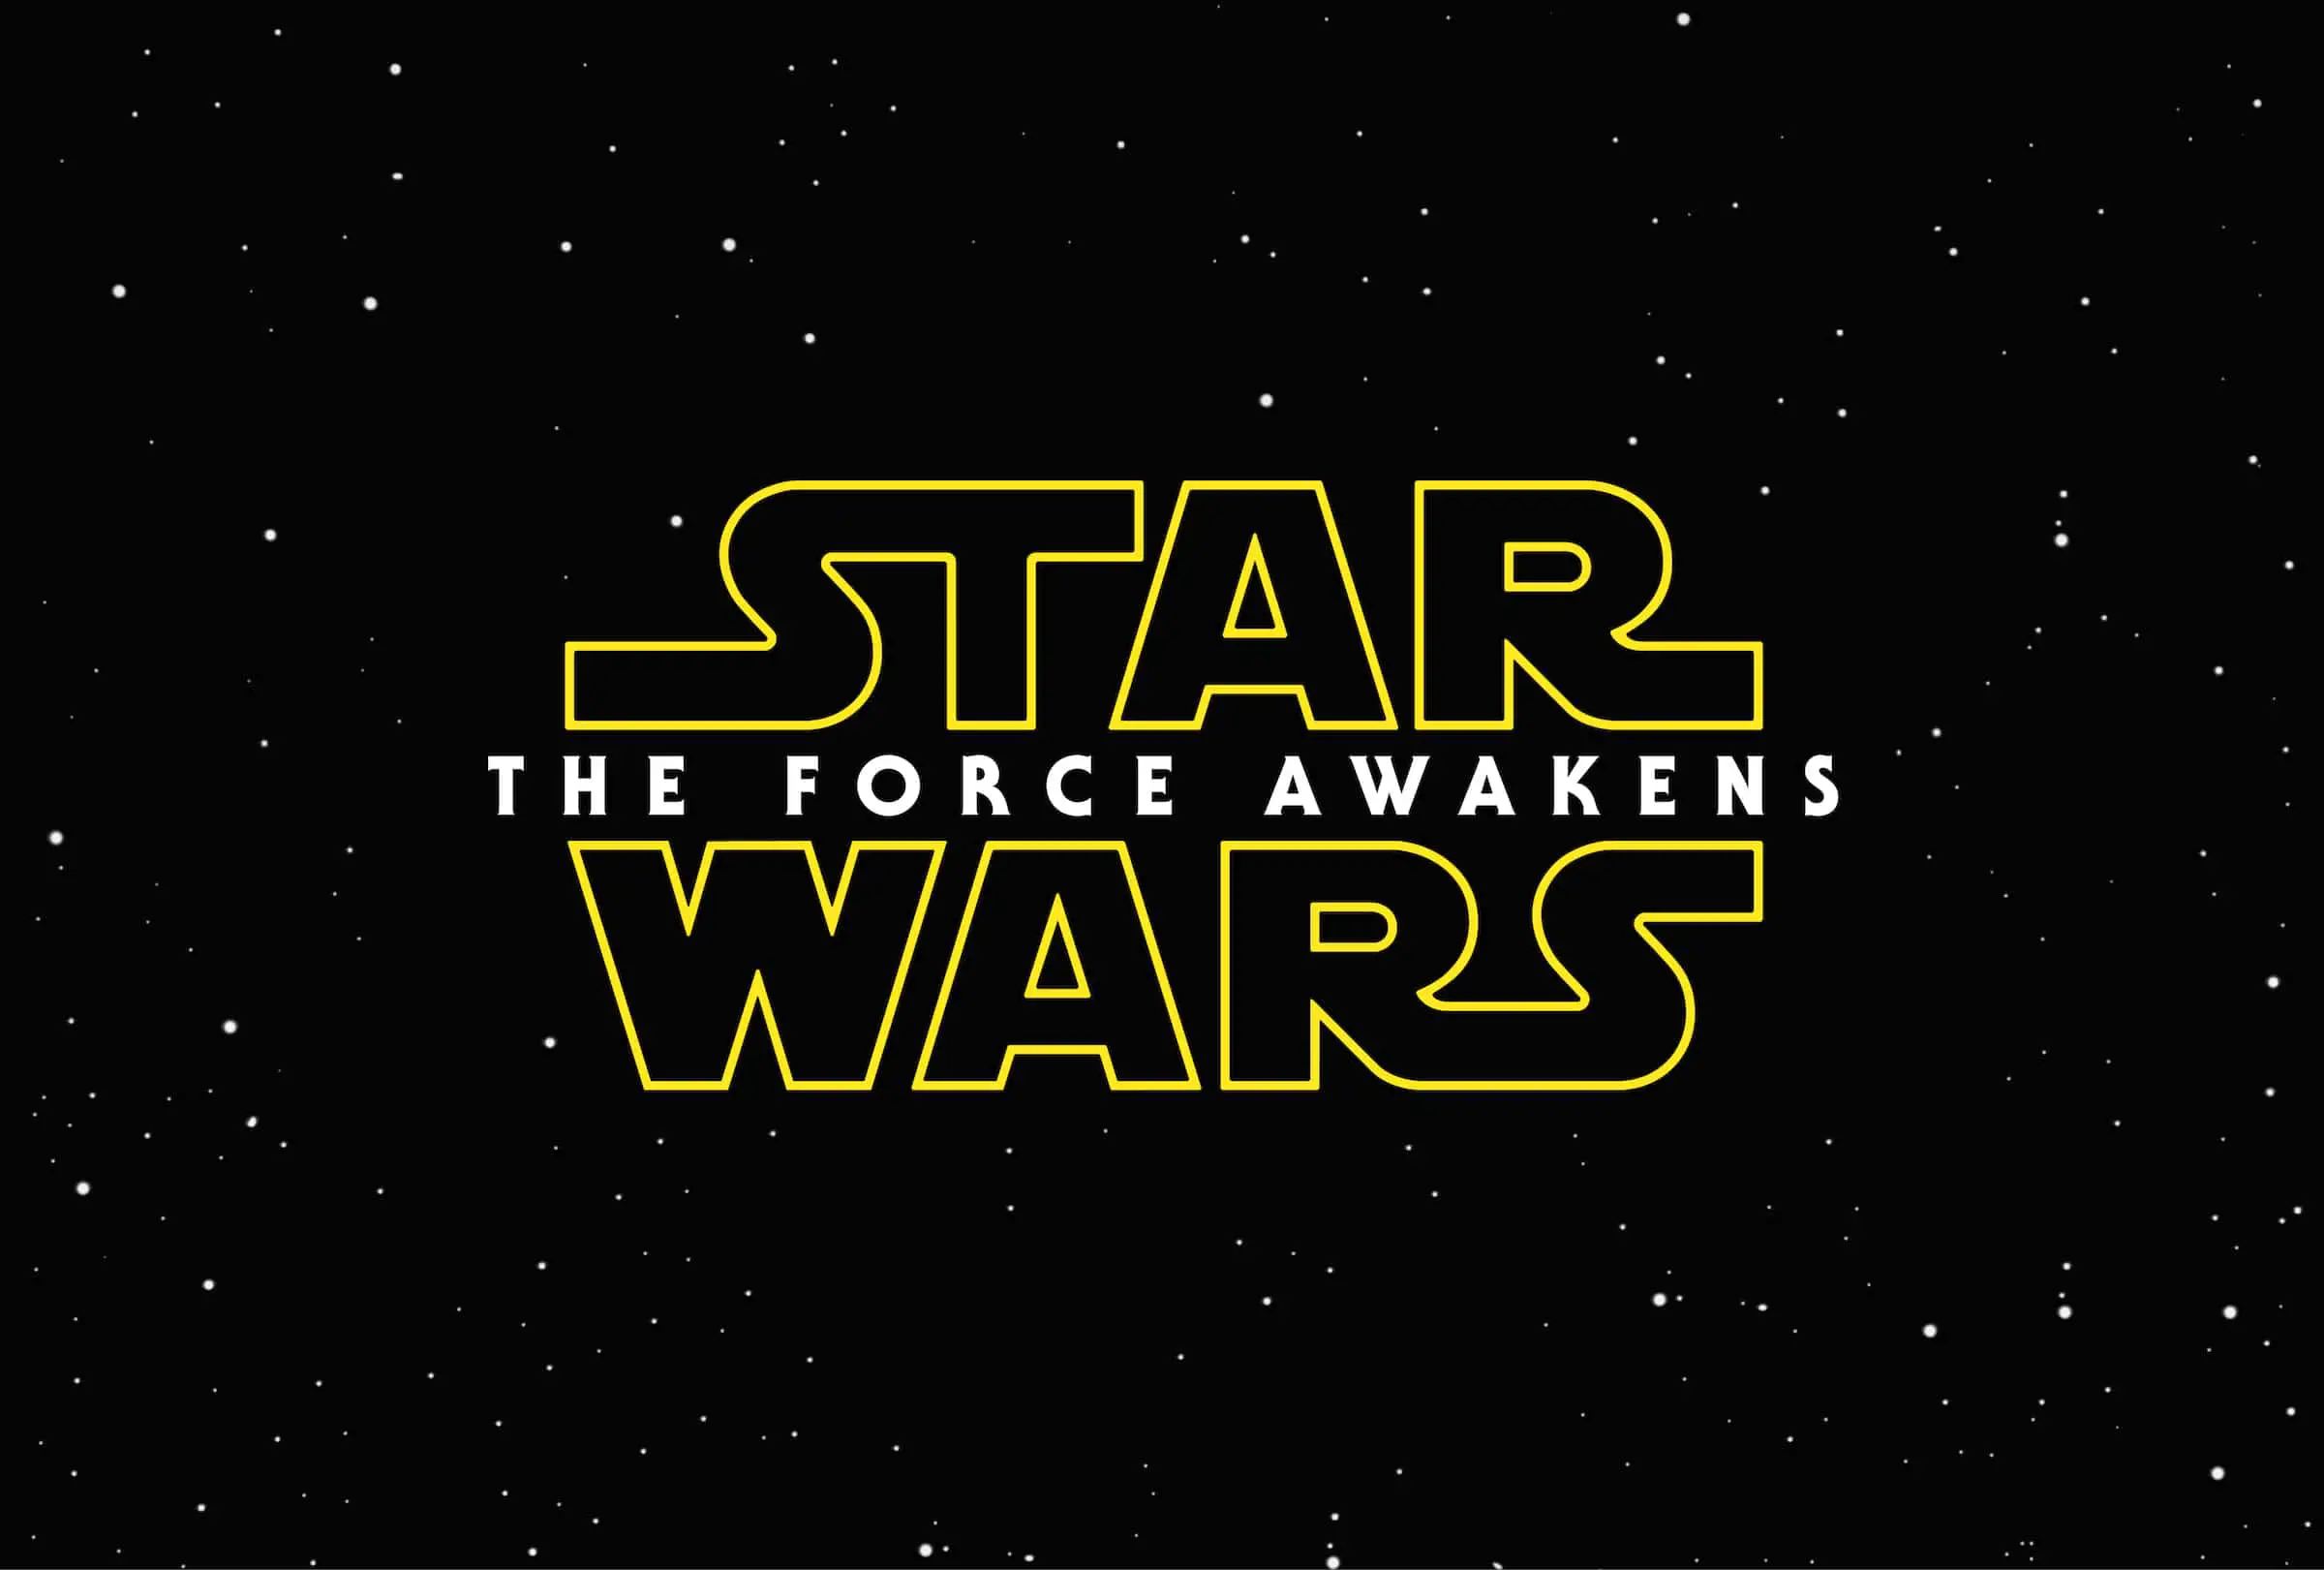 Star Wars: The Force Awakens is coming home on Digital HD April 1 and Blu-ray Combo Pack and DVD on April 5